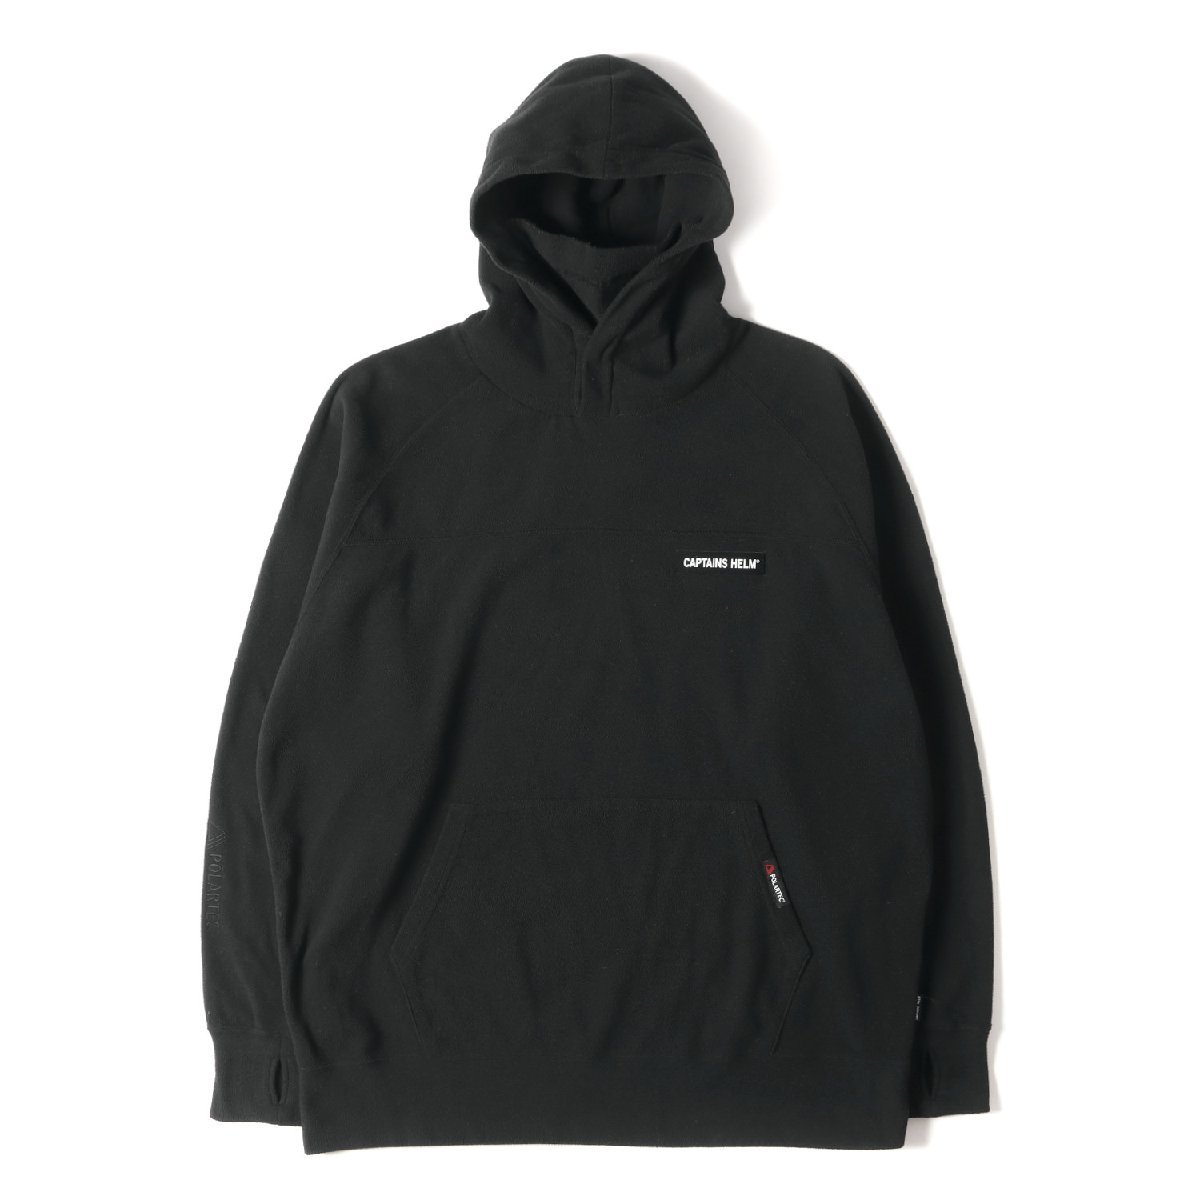 CAPTAINS HELM キャプテンヘルム パーカー サイズ:L 22AW フェイスマスク付き ポーラテック フリース POLARTEC FACE-COVER FLEECE HOODIE